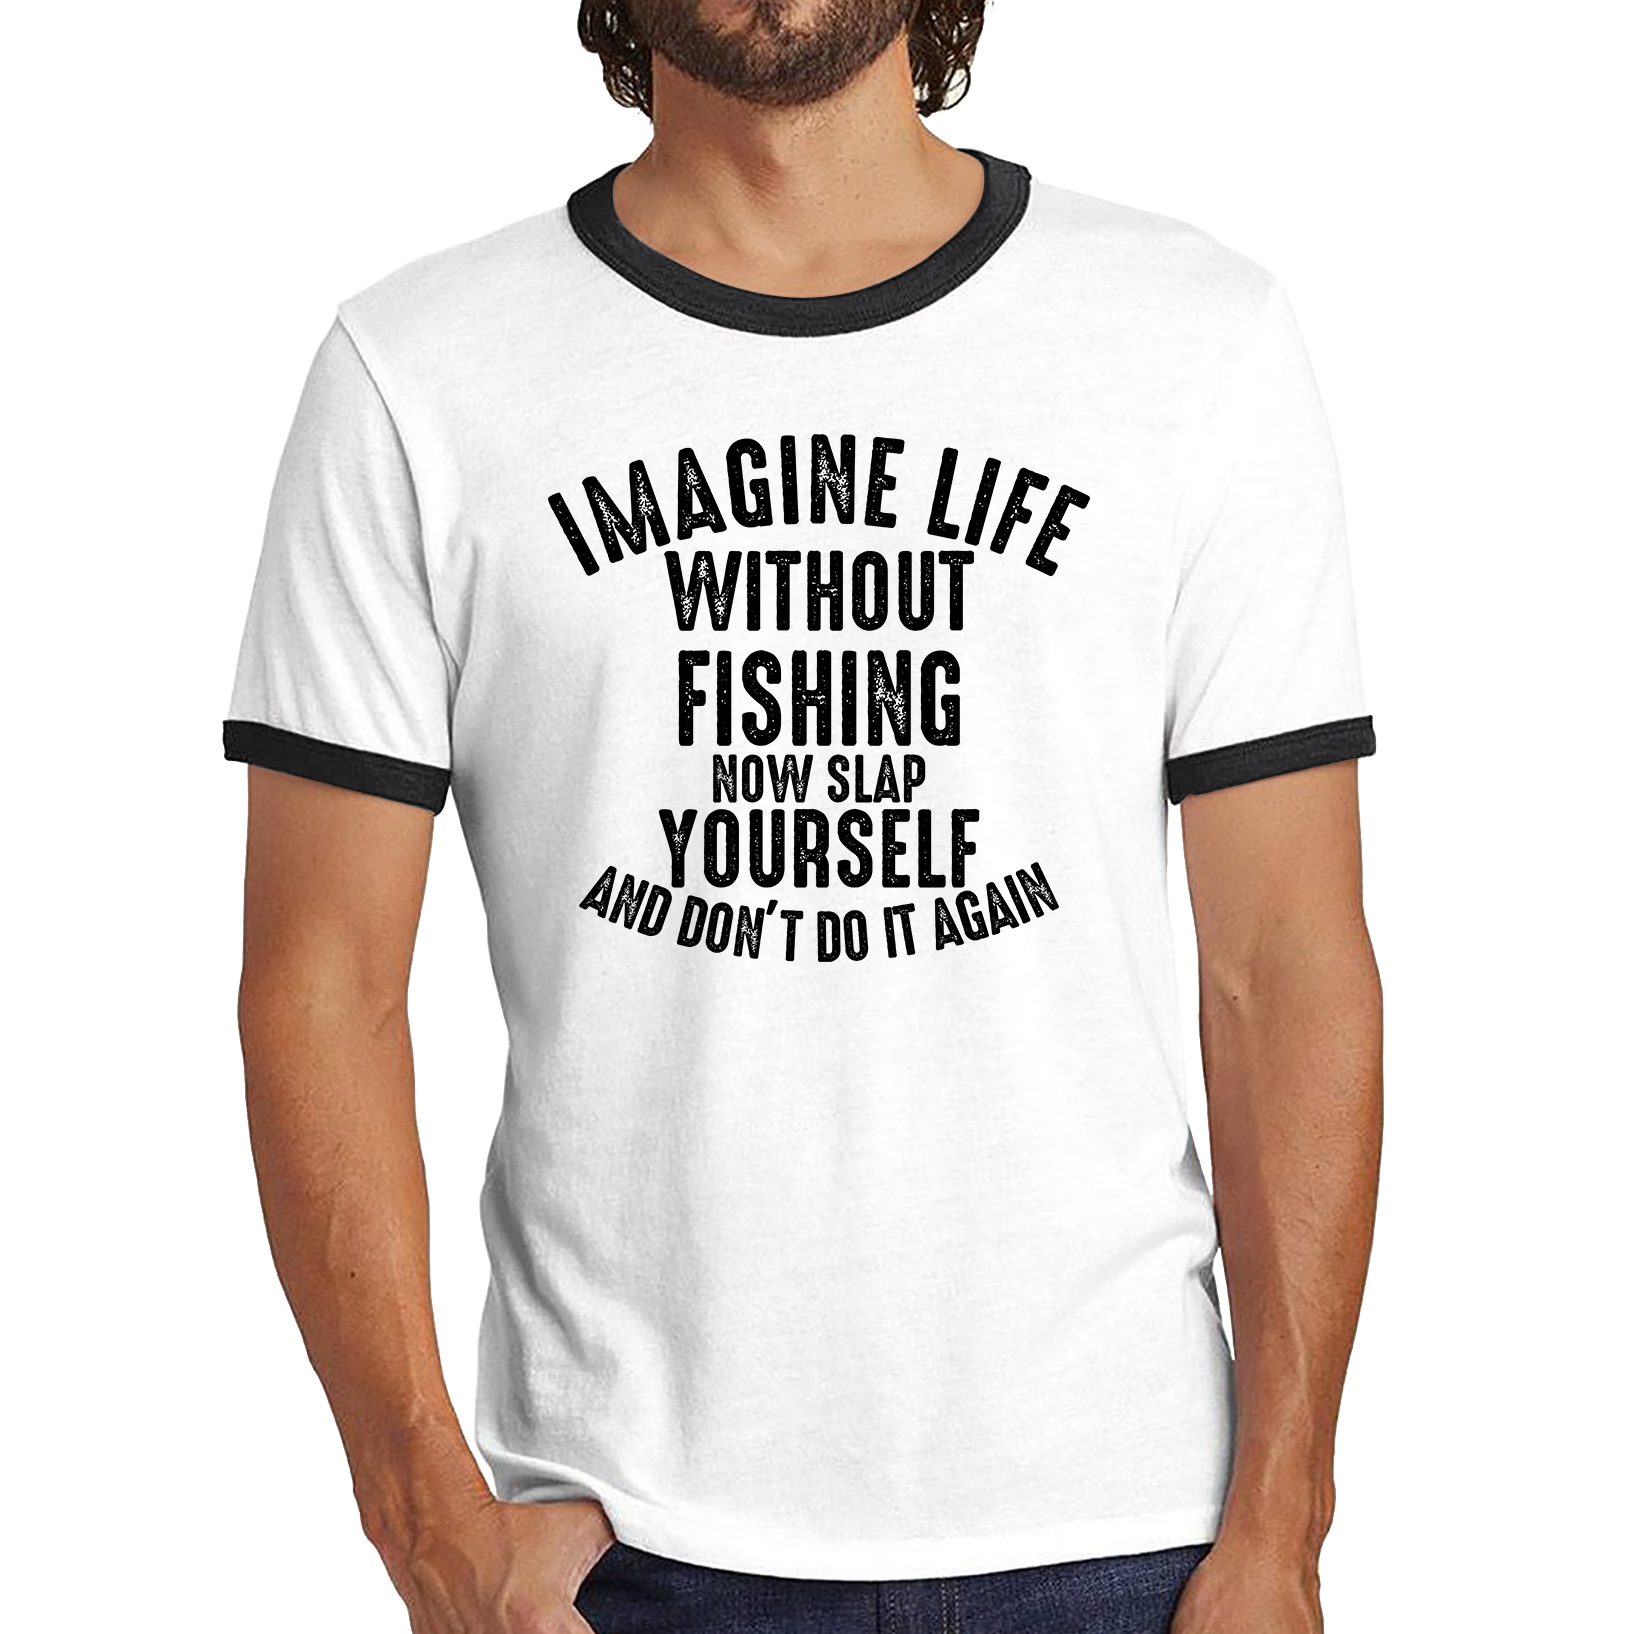 Imagine Life Without Fishing Now Slap Yourself And Don't Do It Again Shirt Fisherman Fishing Adventure Hobby Funny Ringer T Shirt